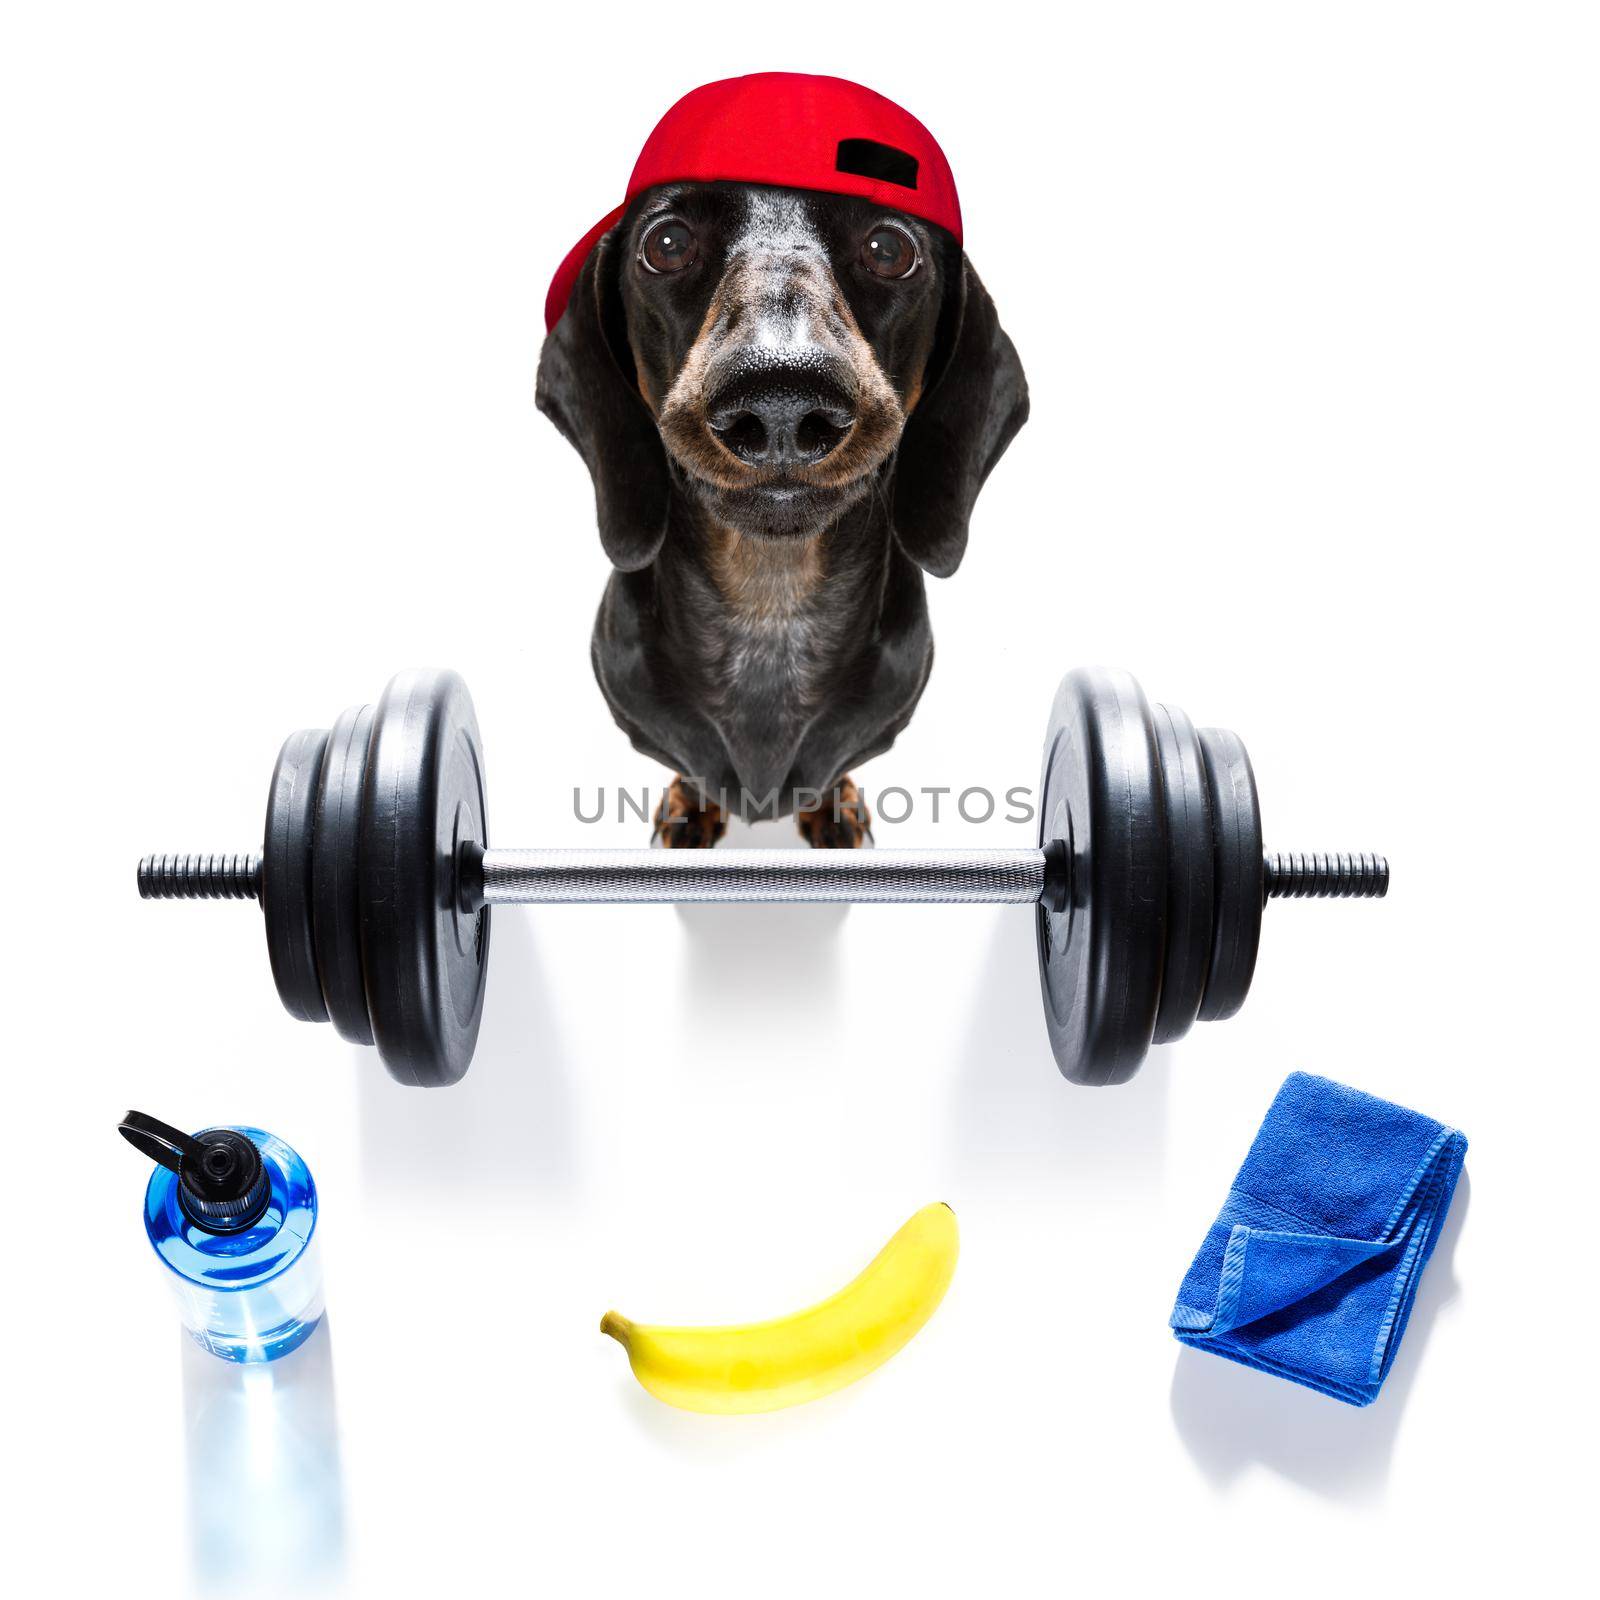 fitness sausage dachshund dog lifting a heavy big dumbbell, as personal trainer , isolated on white background and a banana fruit